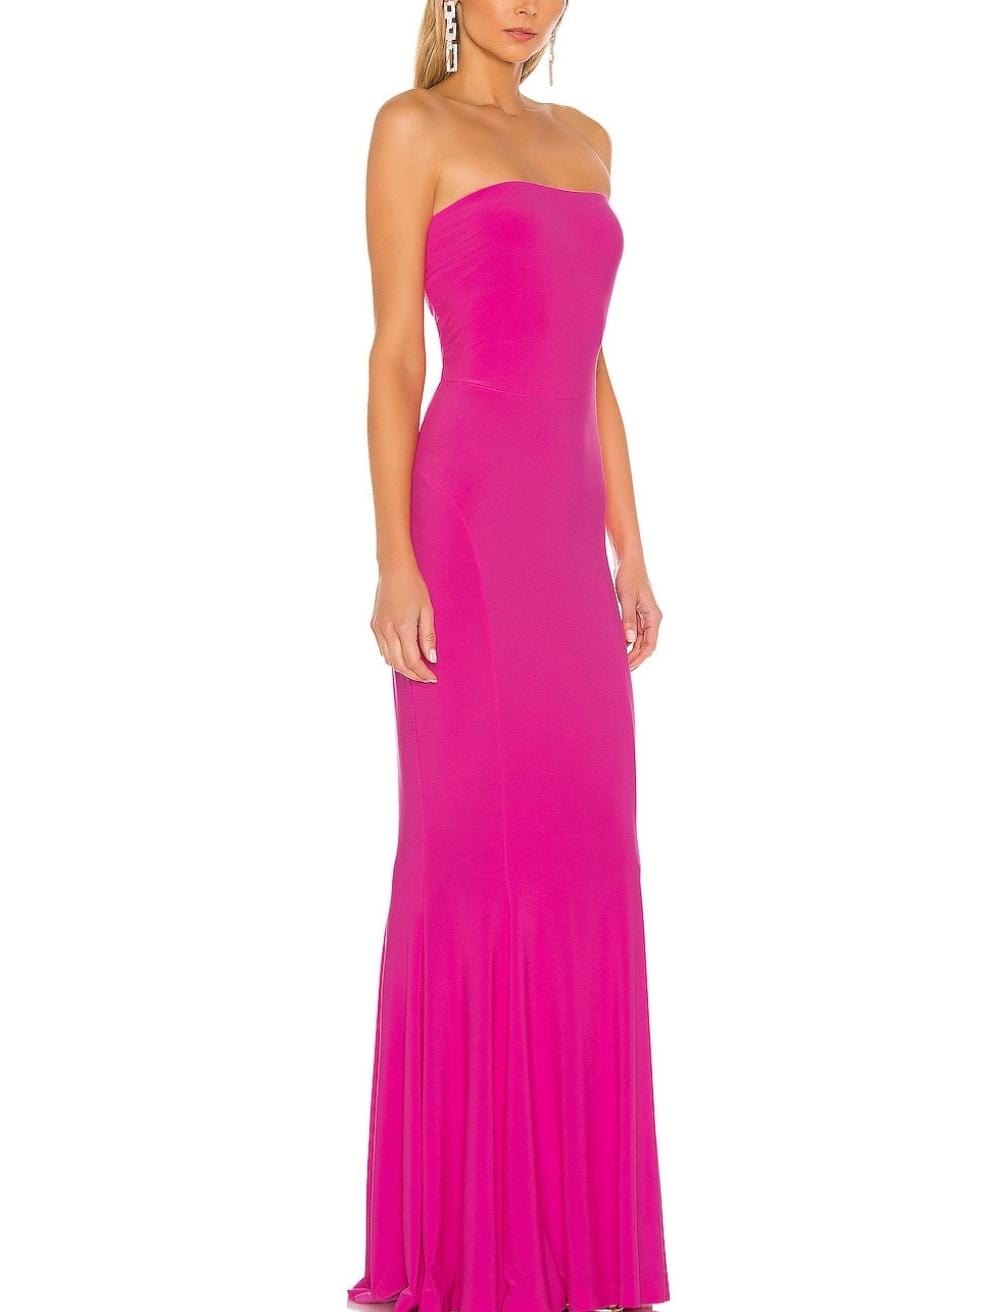 Strapless Fishtail Gown in Pink